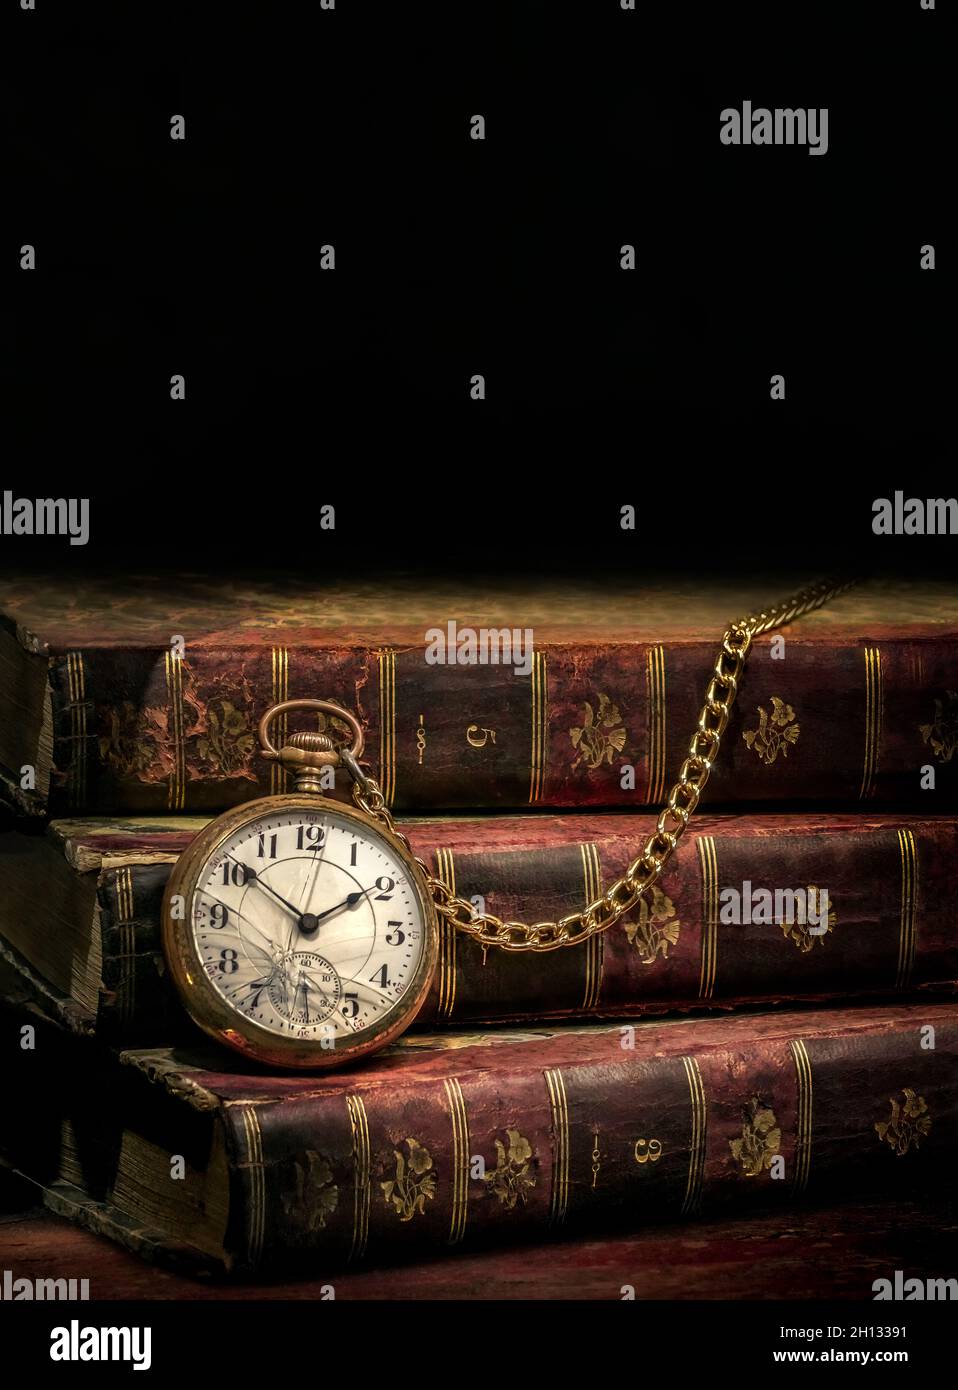 Vintage Antique pocket watch and old books on black background Stock Photo